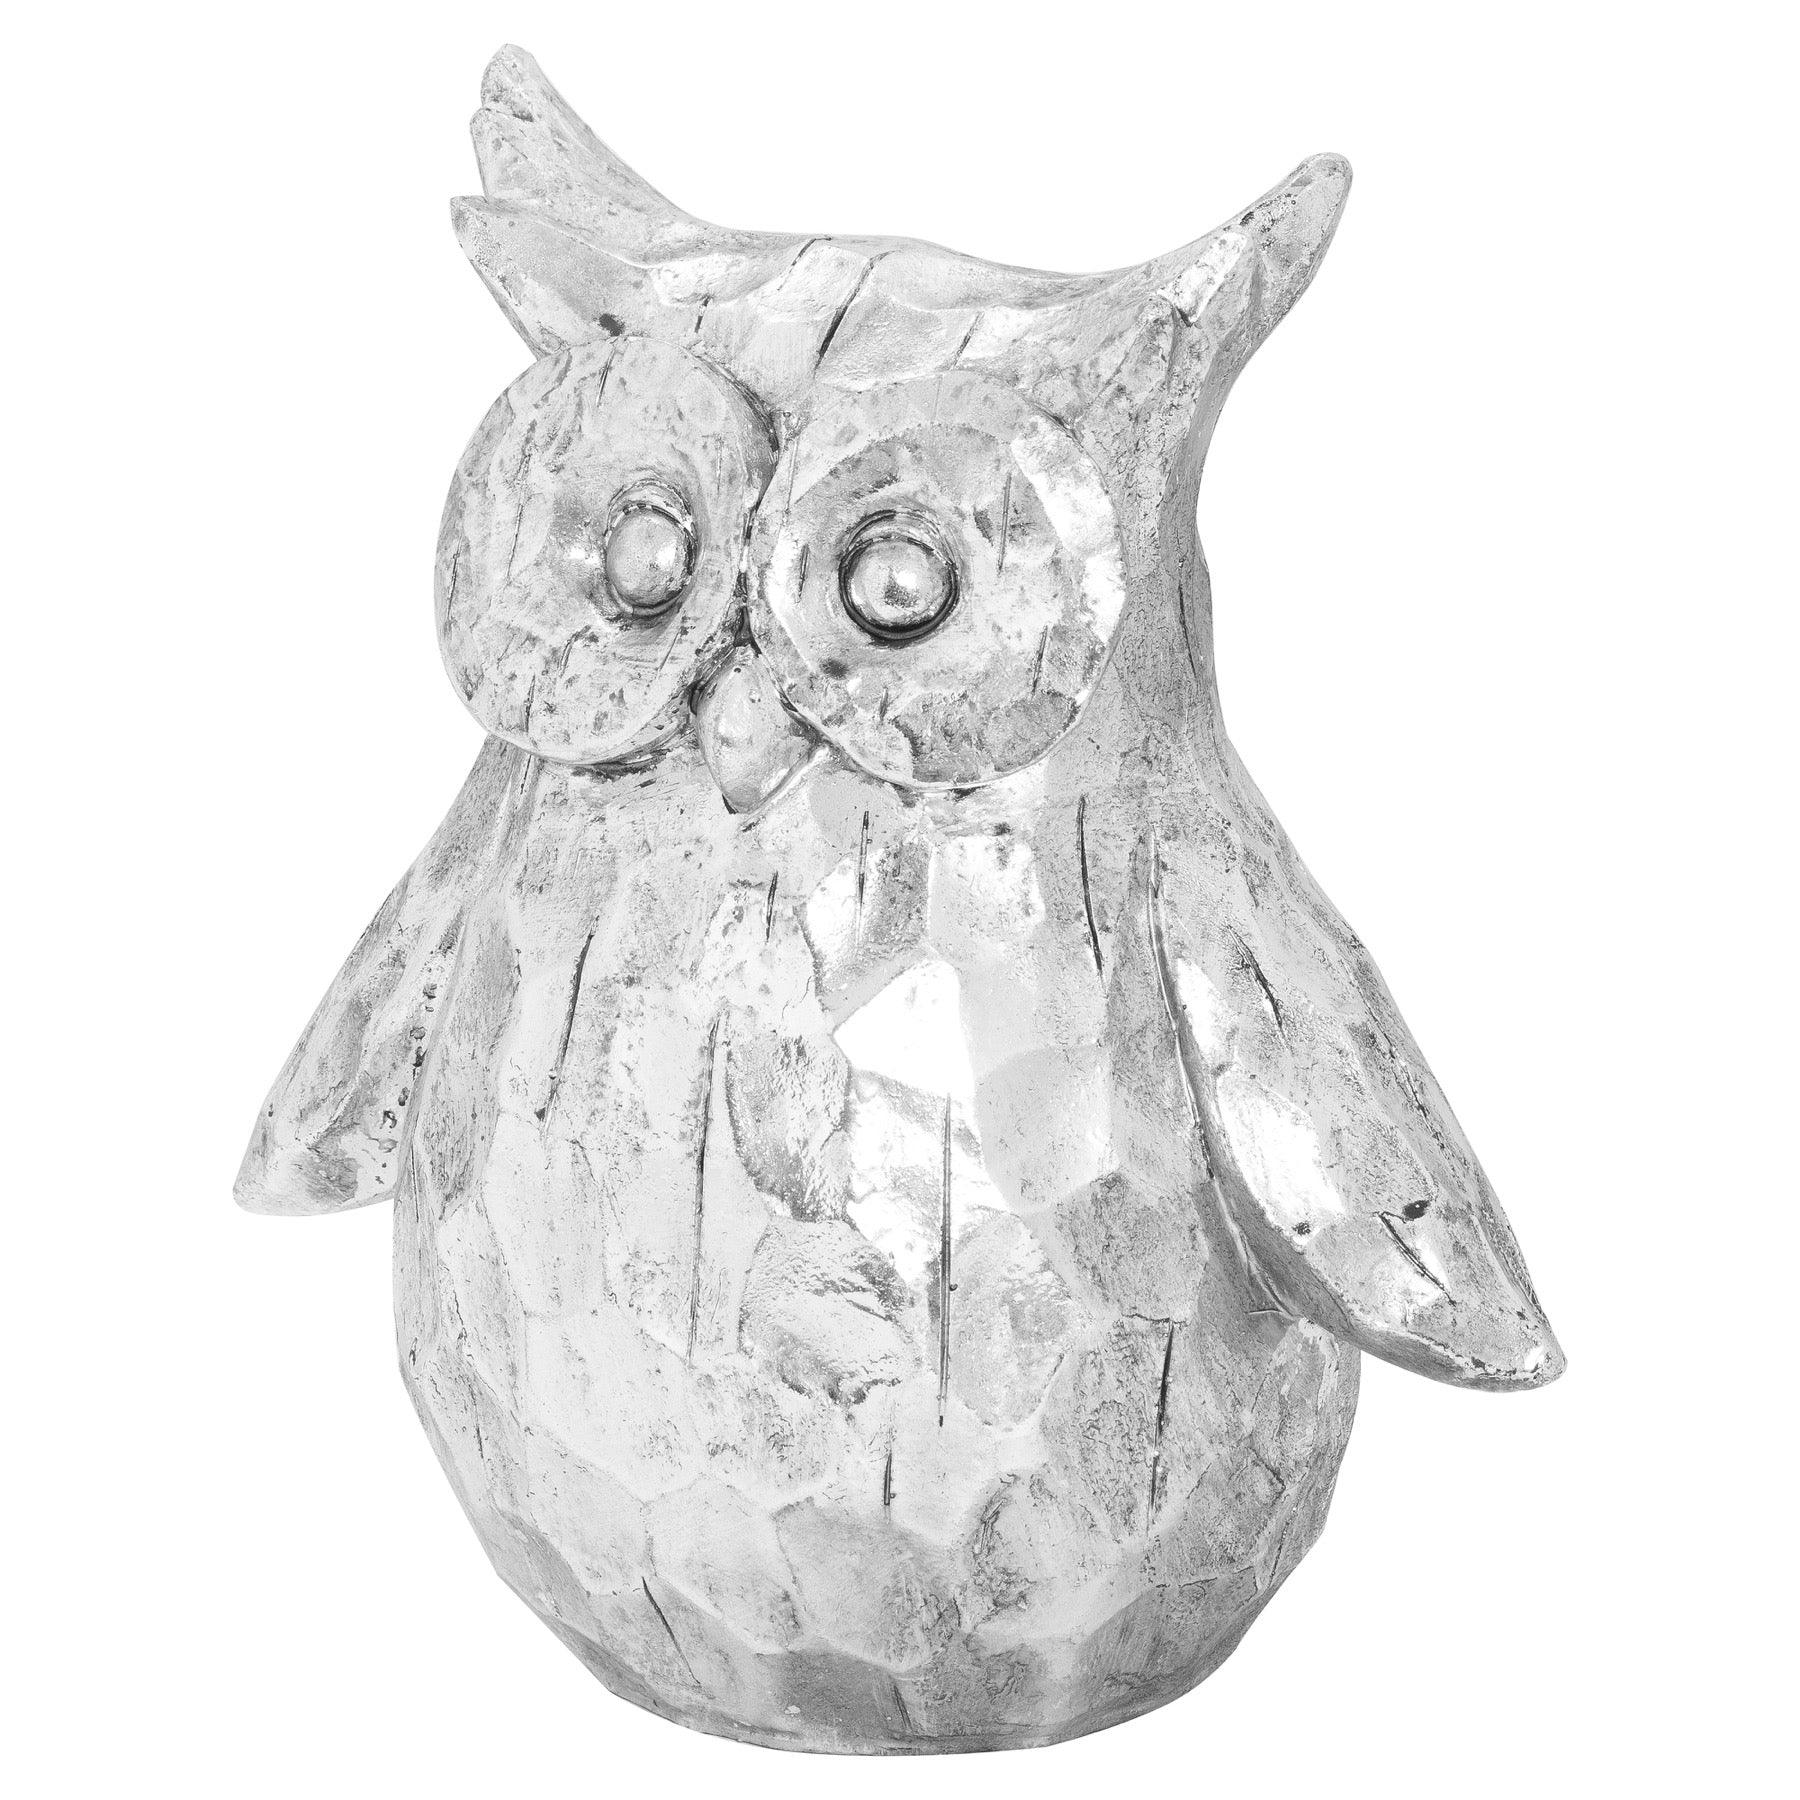 View Olive The Large Silver Ceramic Owl information